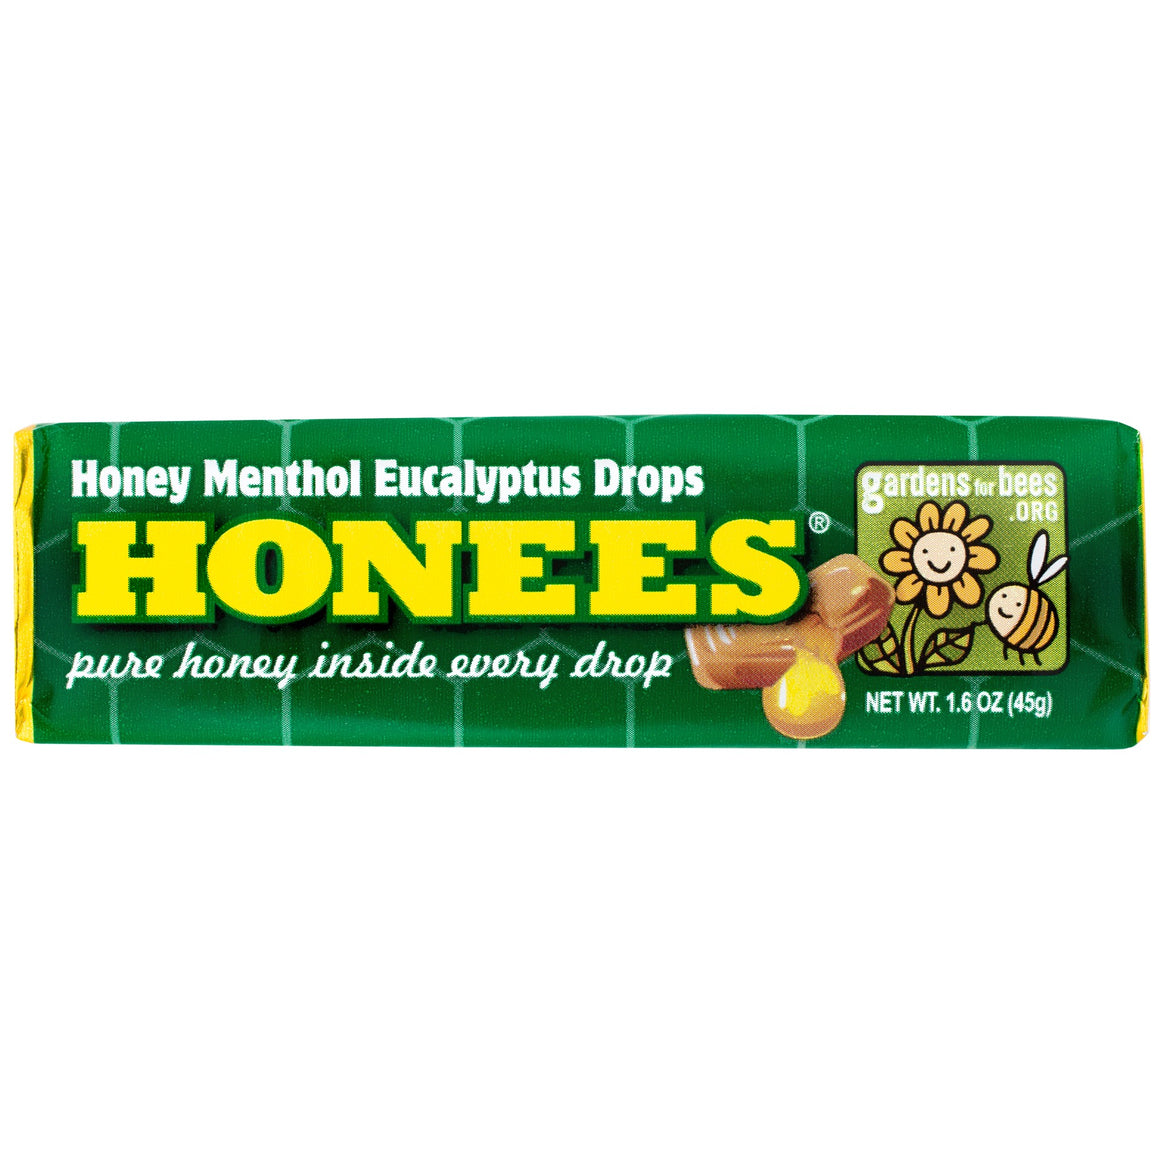 All City Candy Honees Cough Drop Honey Menthol Eucalyptus 1.6 oz Hard Candy G.B. Ambrosoli For fresh candy and great service, visit www.allcitycandy.com